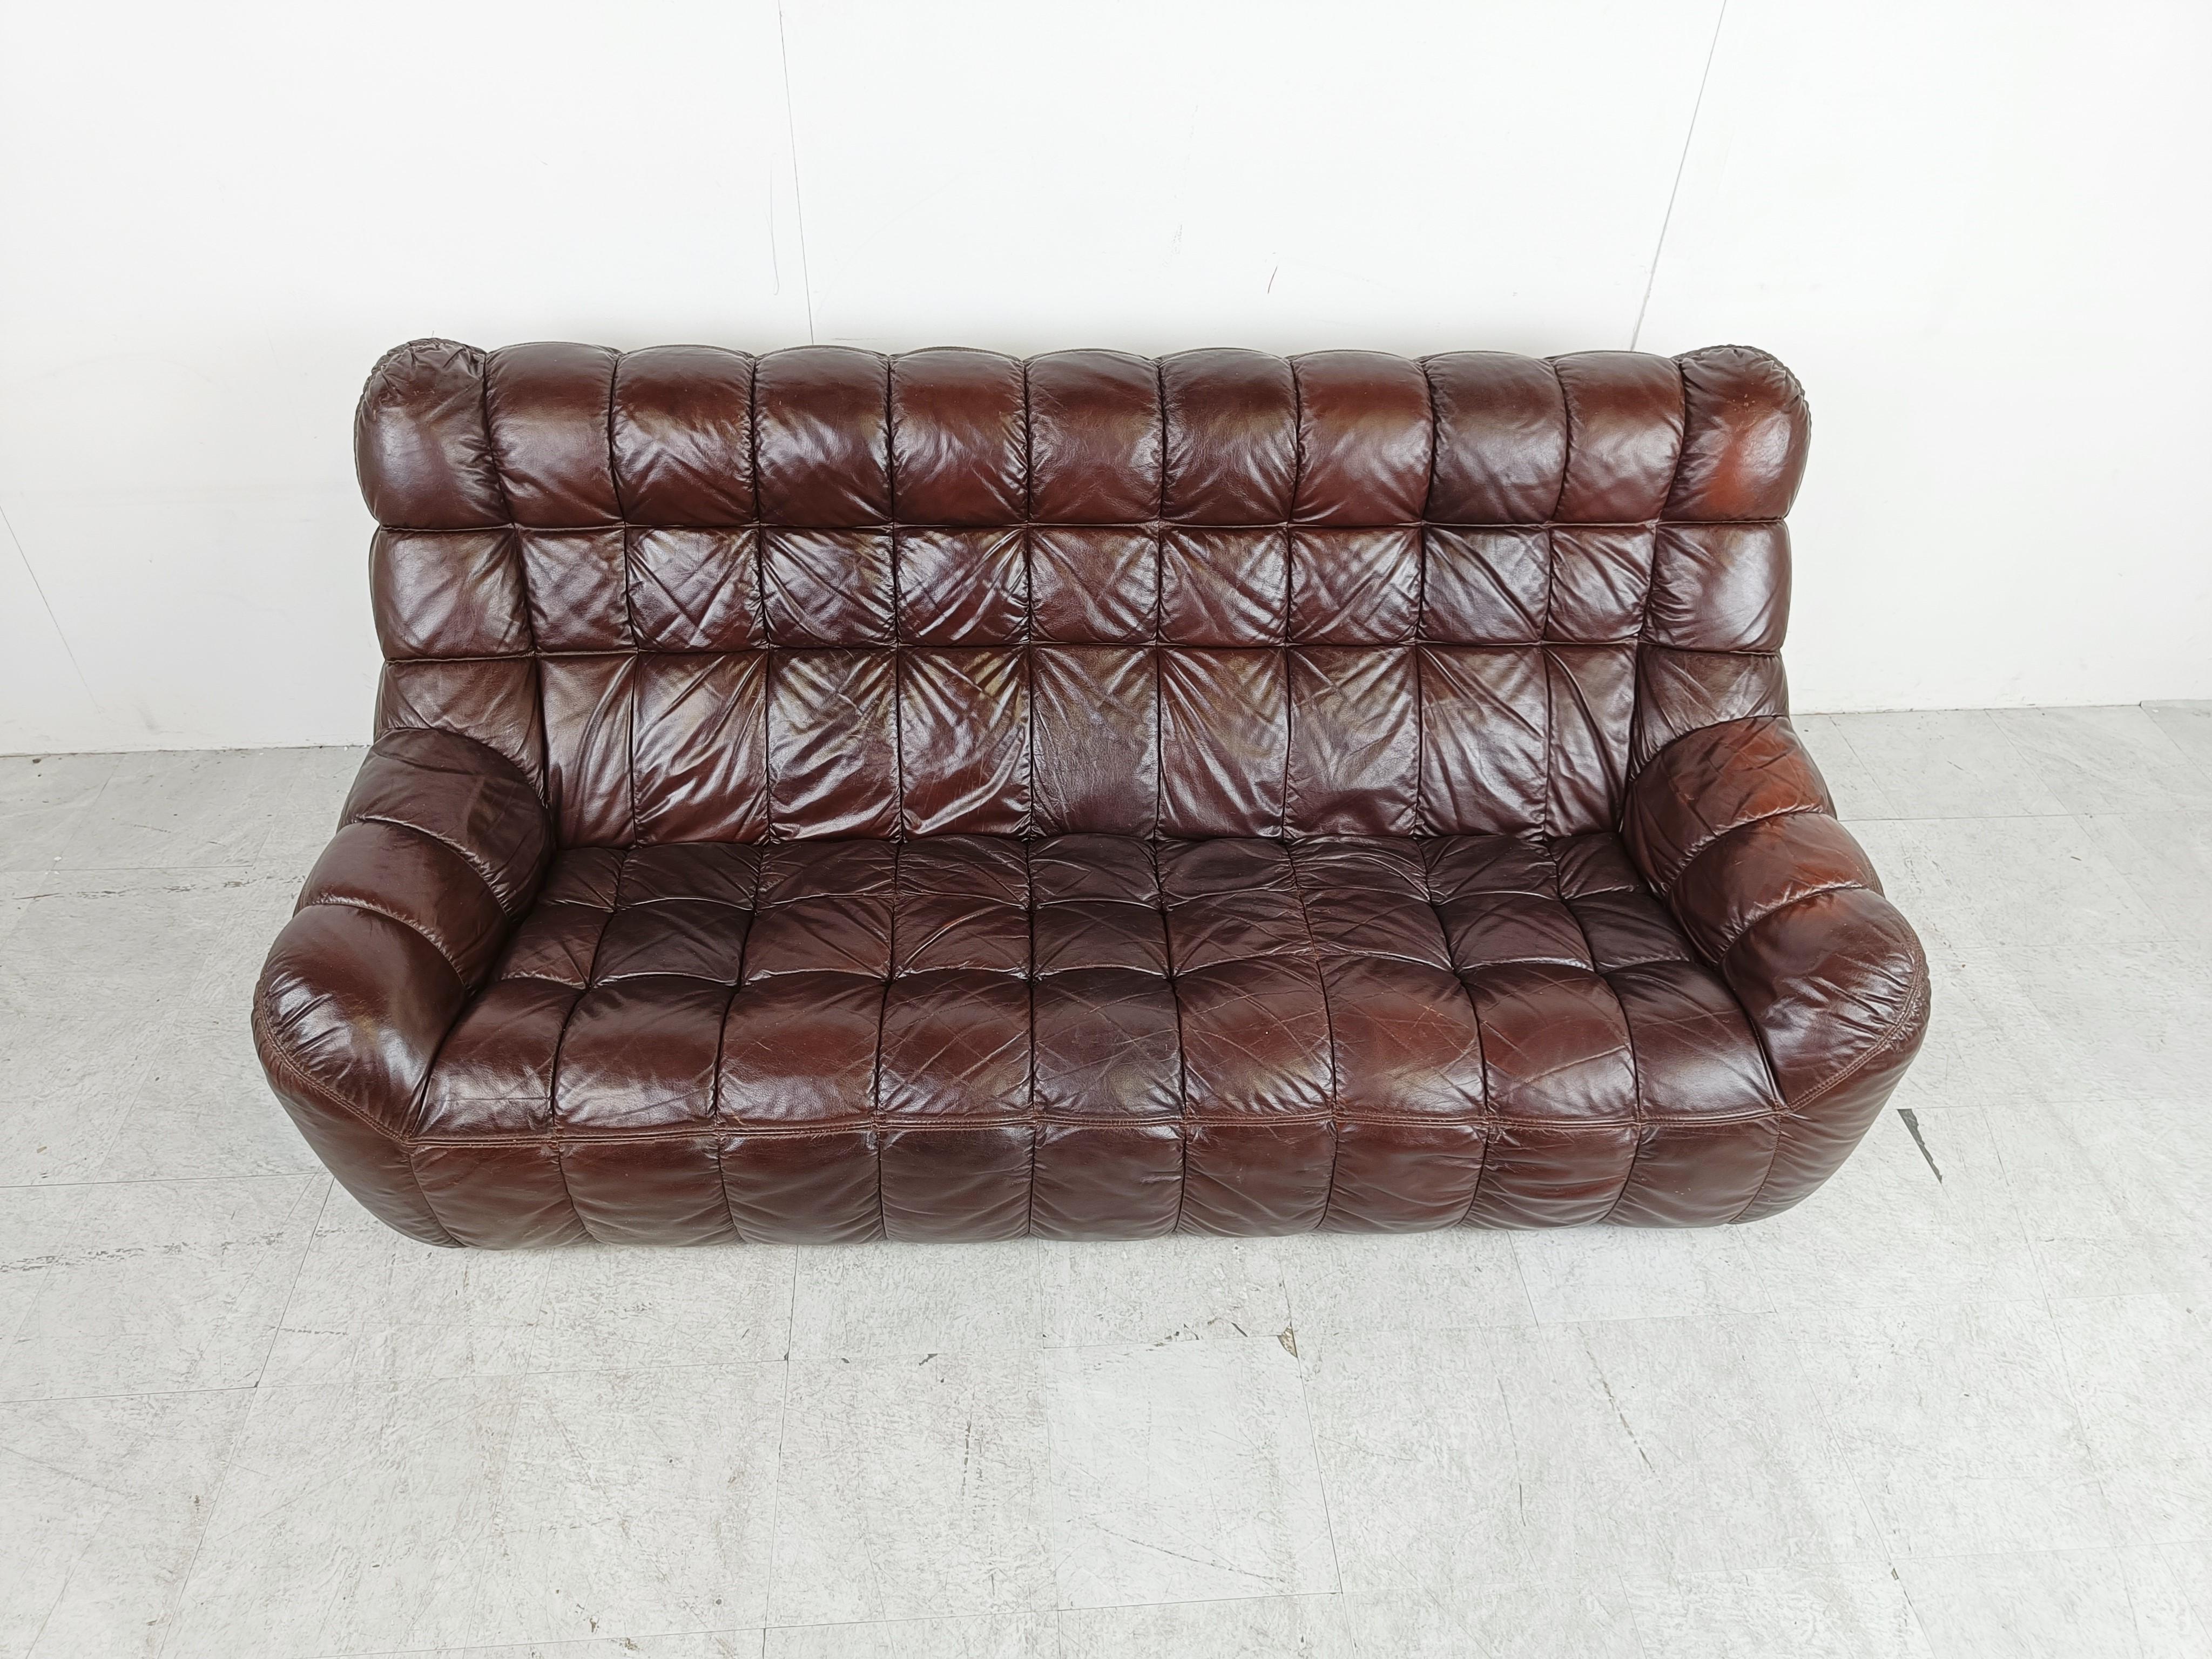 Vintage brown leather patchwork sofa.

The sofa is very light and comfortable being made from foam and leather. No metal or wooden structure inside the sofa just like Michel Ducaroys sofas.

Good condition wit normal age related wear. No rips holes